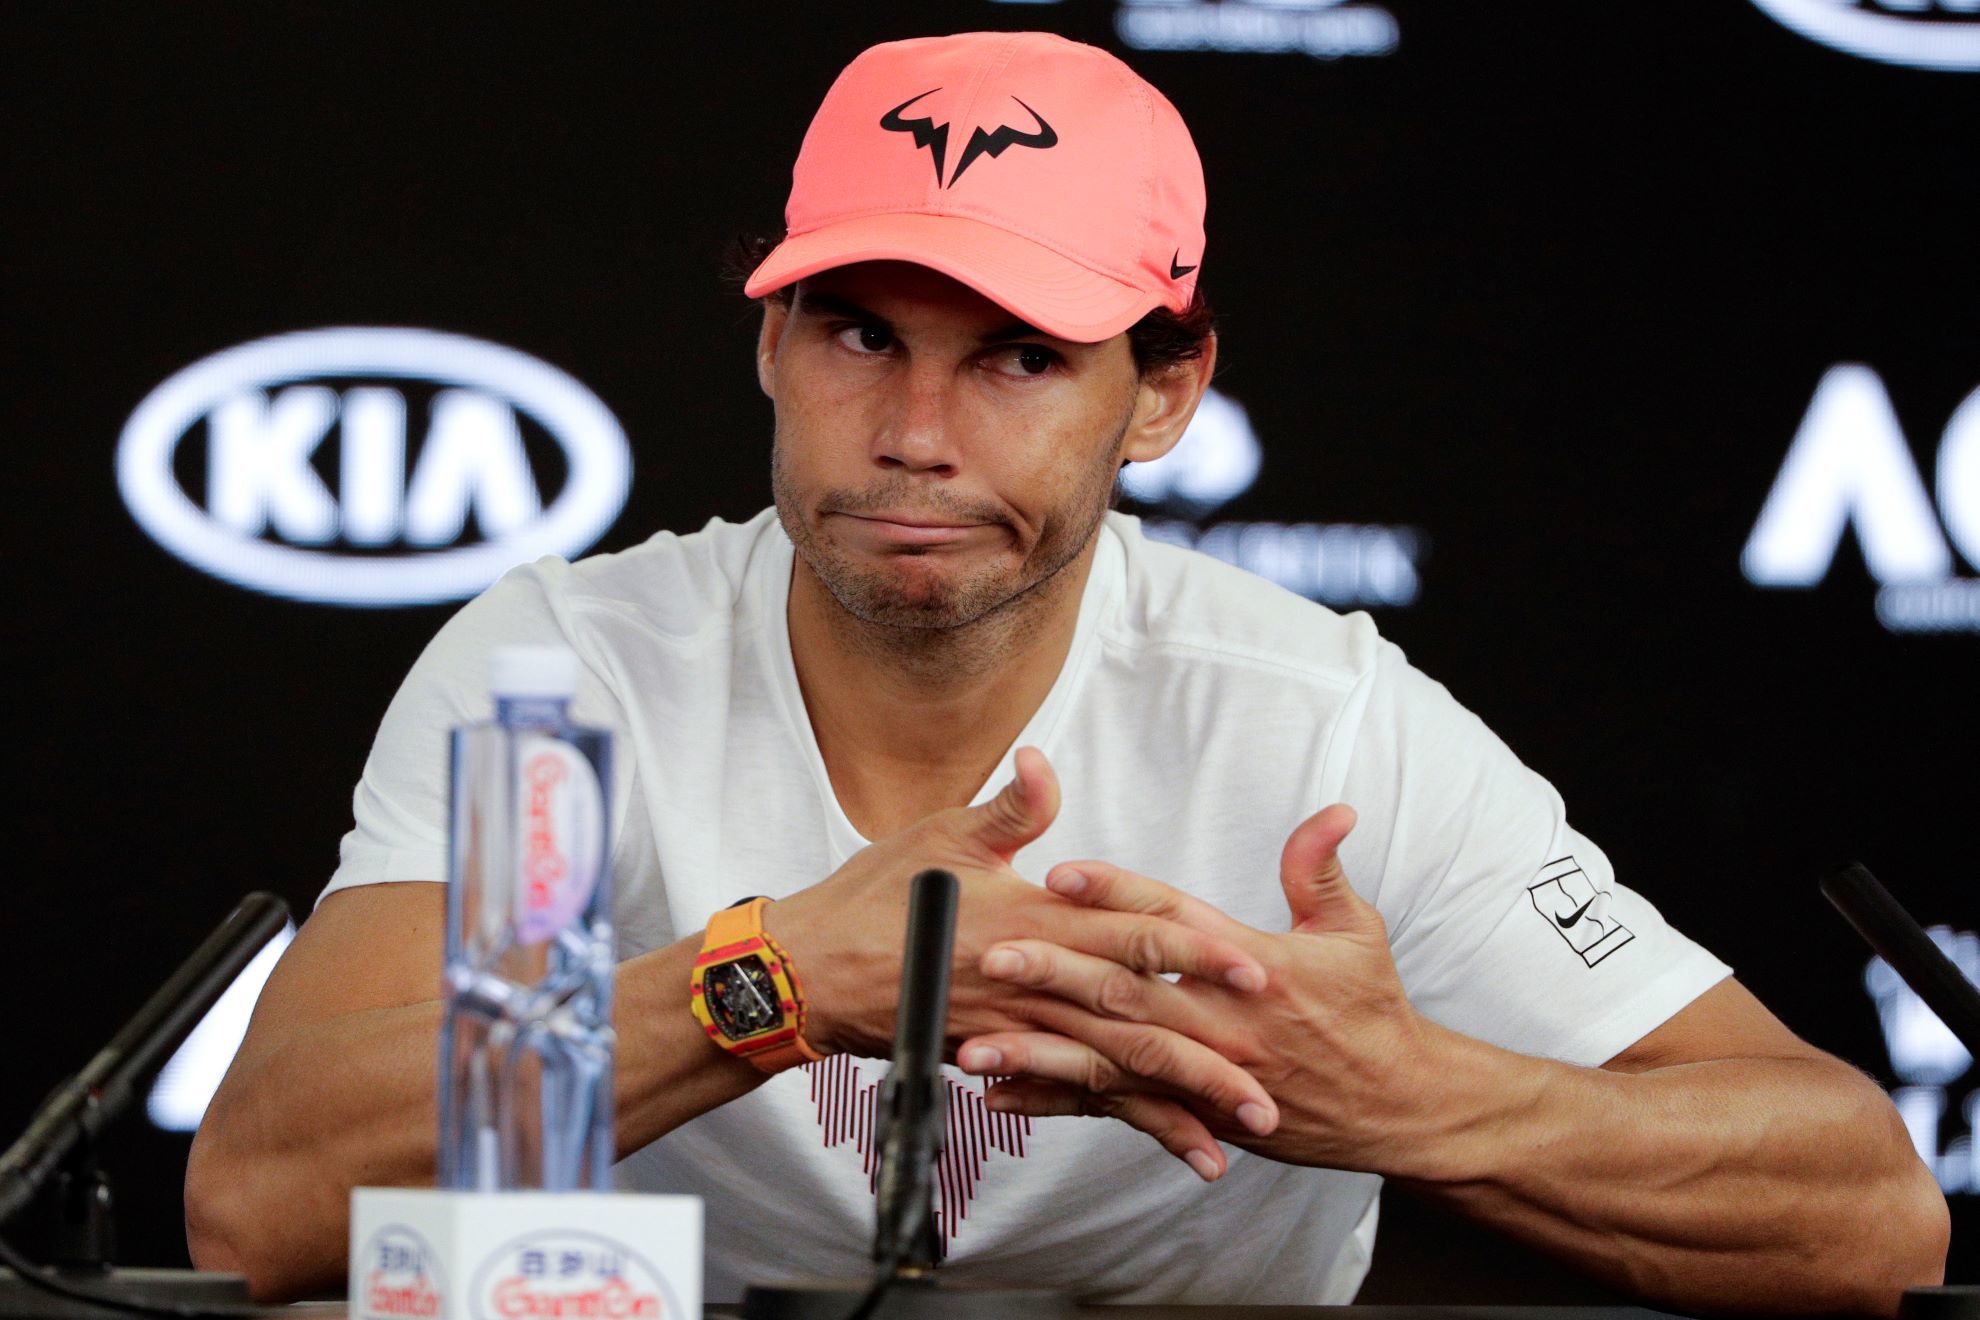 Rafael Nadal answers questions at a press conference.